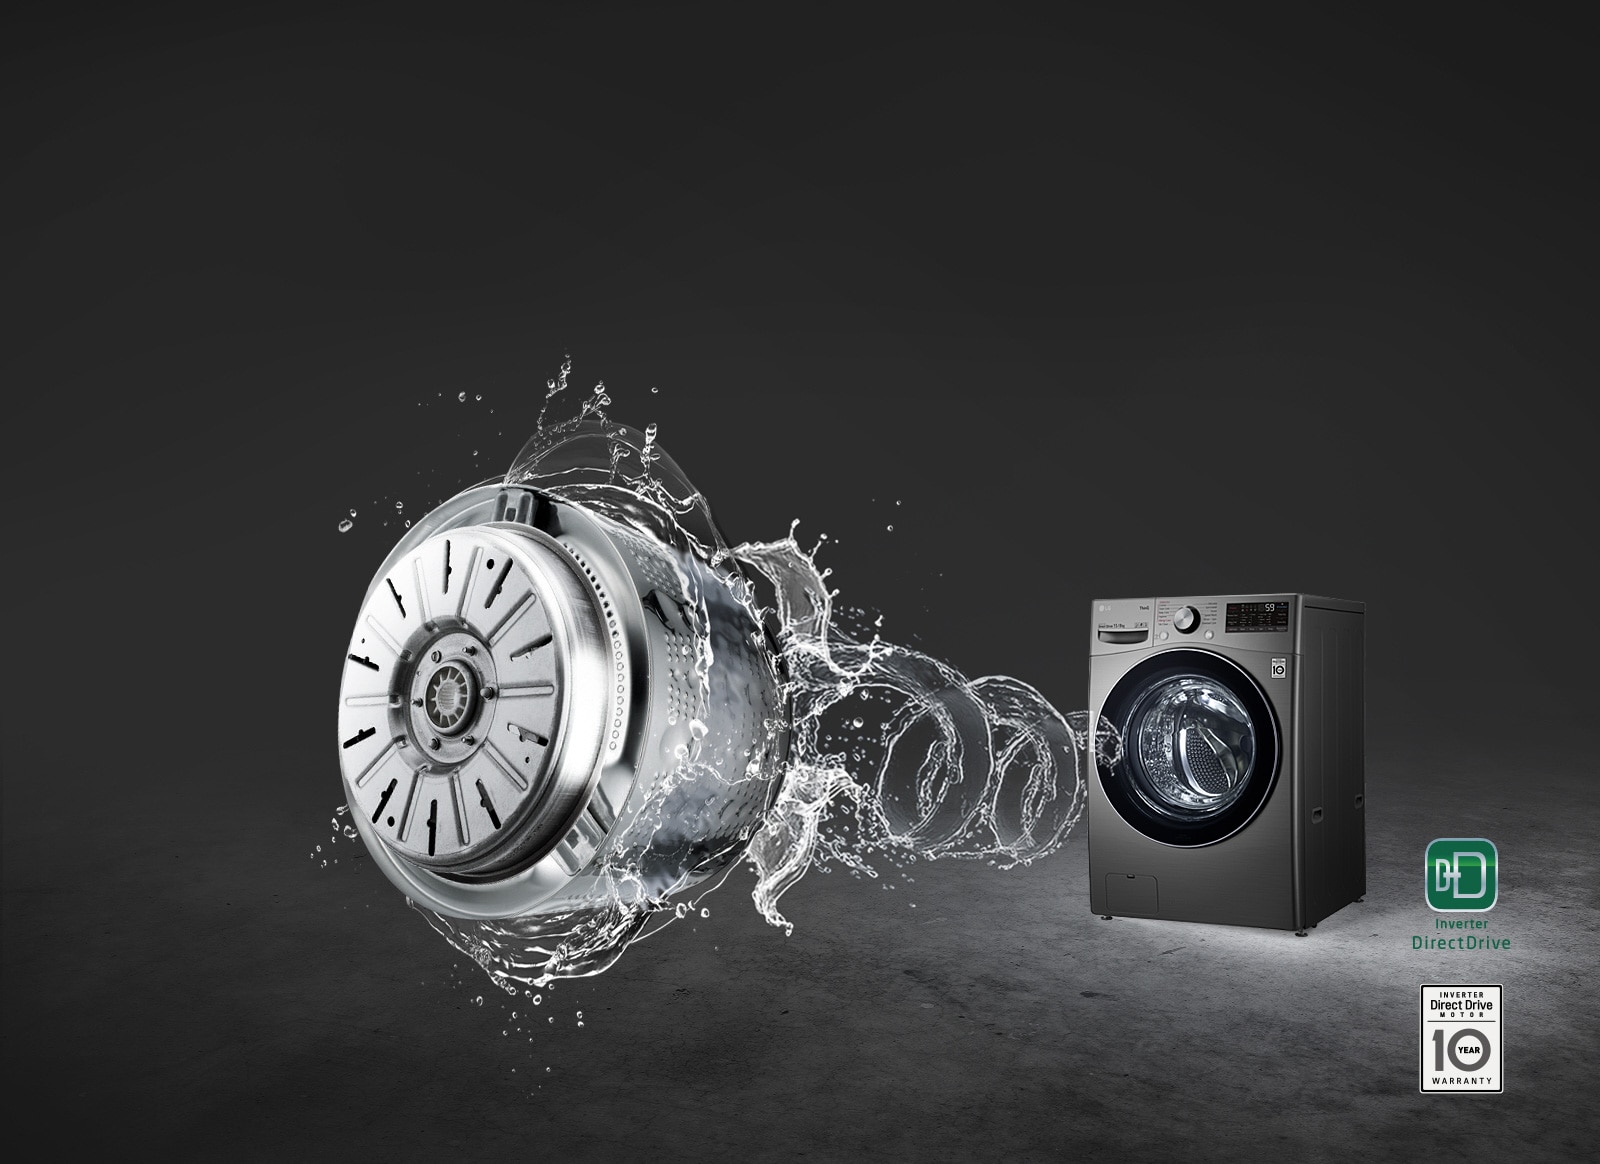 A grey background with the washing machine front loading washer highlighted and a swirl of water thrusting from the front to lead to an image of the Inverter Direct Drive Motor.